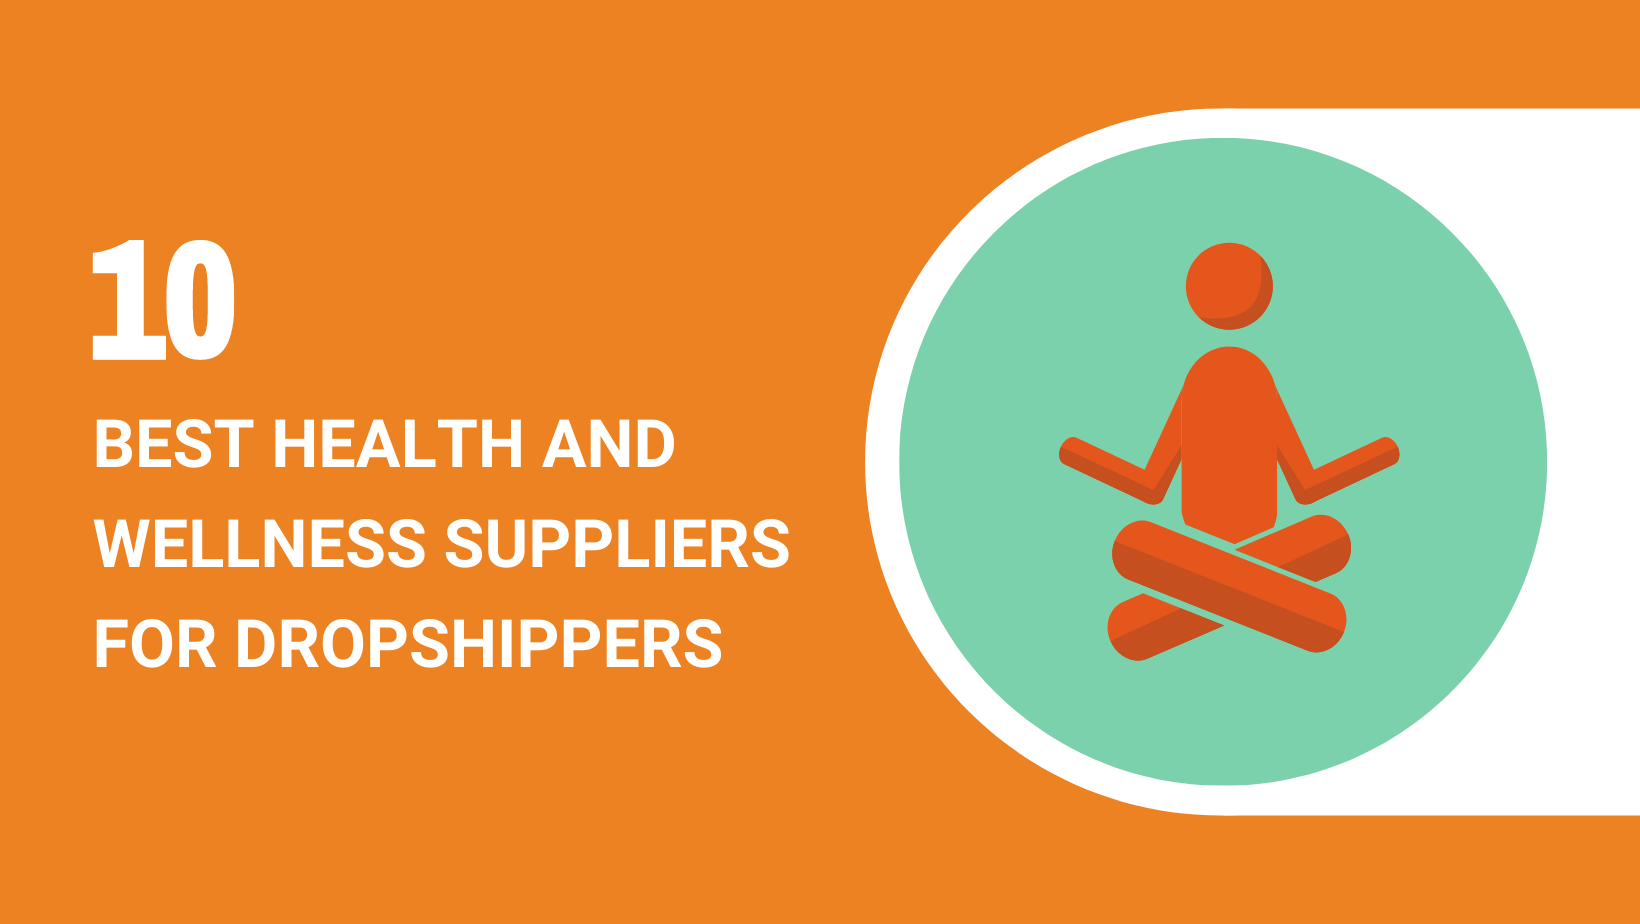 10 BEST HEALTH AND WELLNESS SUPPLIERS FOR DROPSHIPPERS